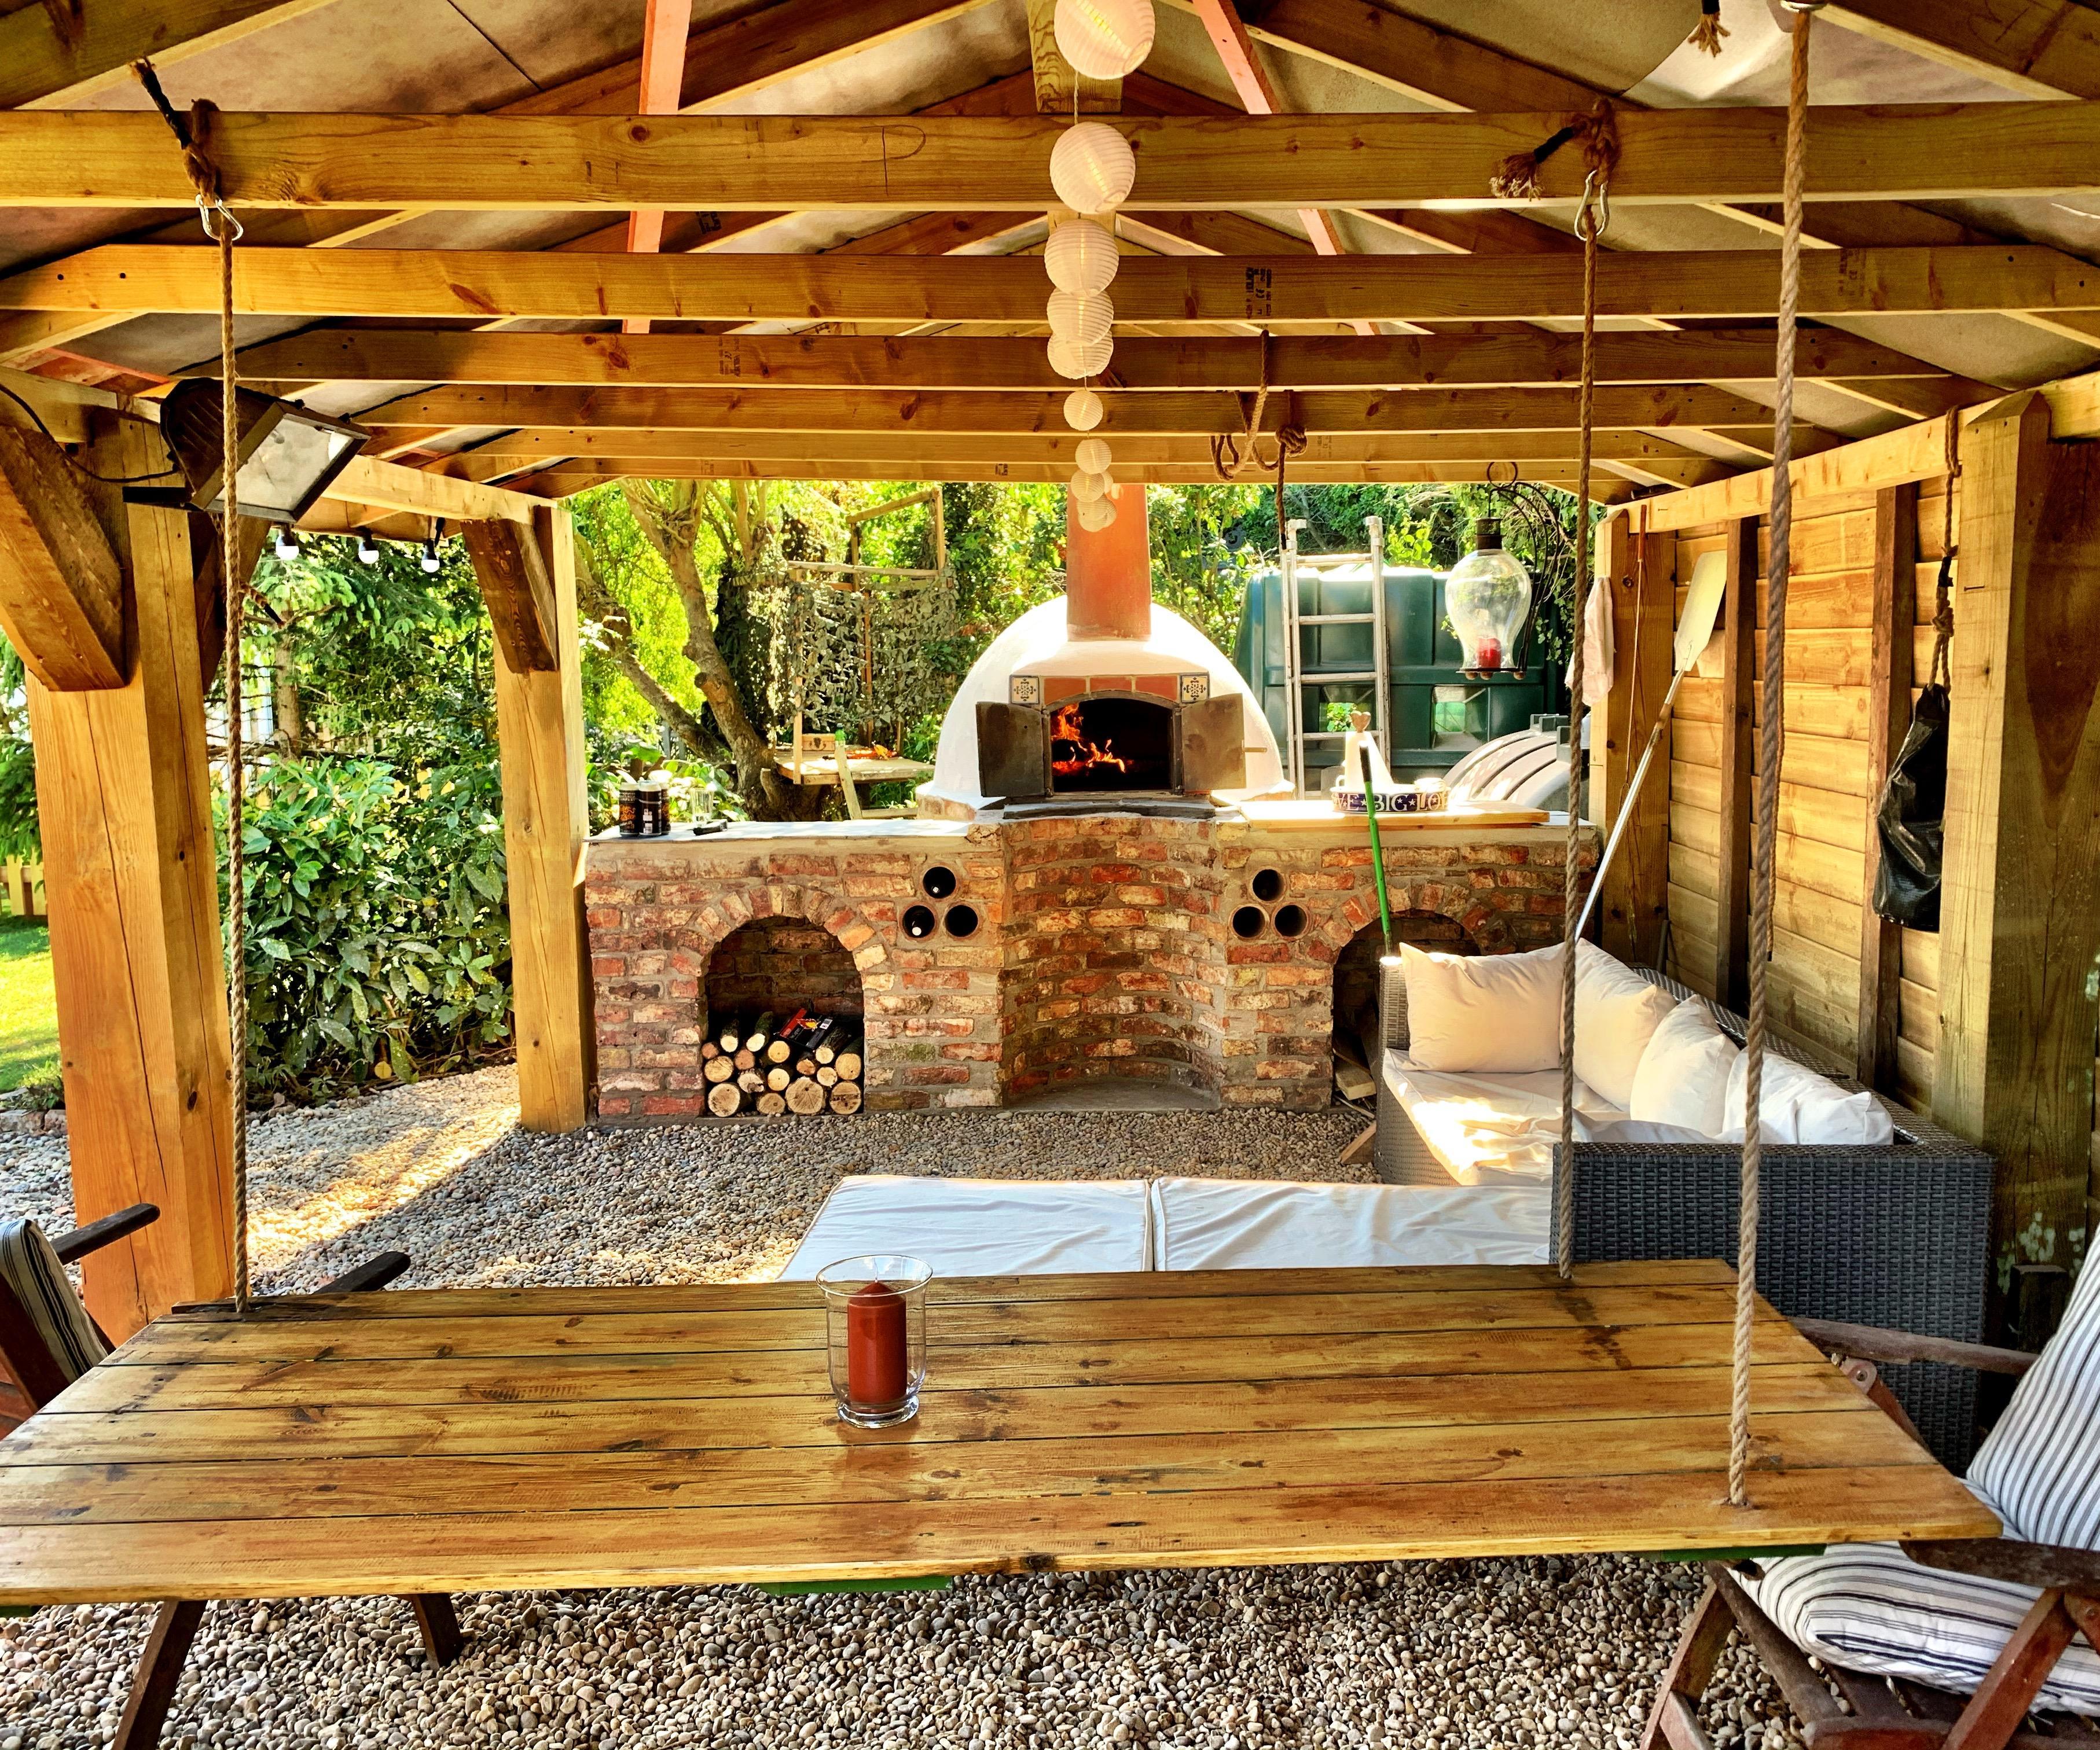 Build Your Own Traditional Wood Fired Pizza Oven, Step by Step With Photos